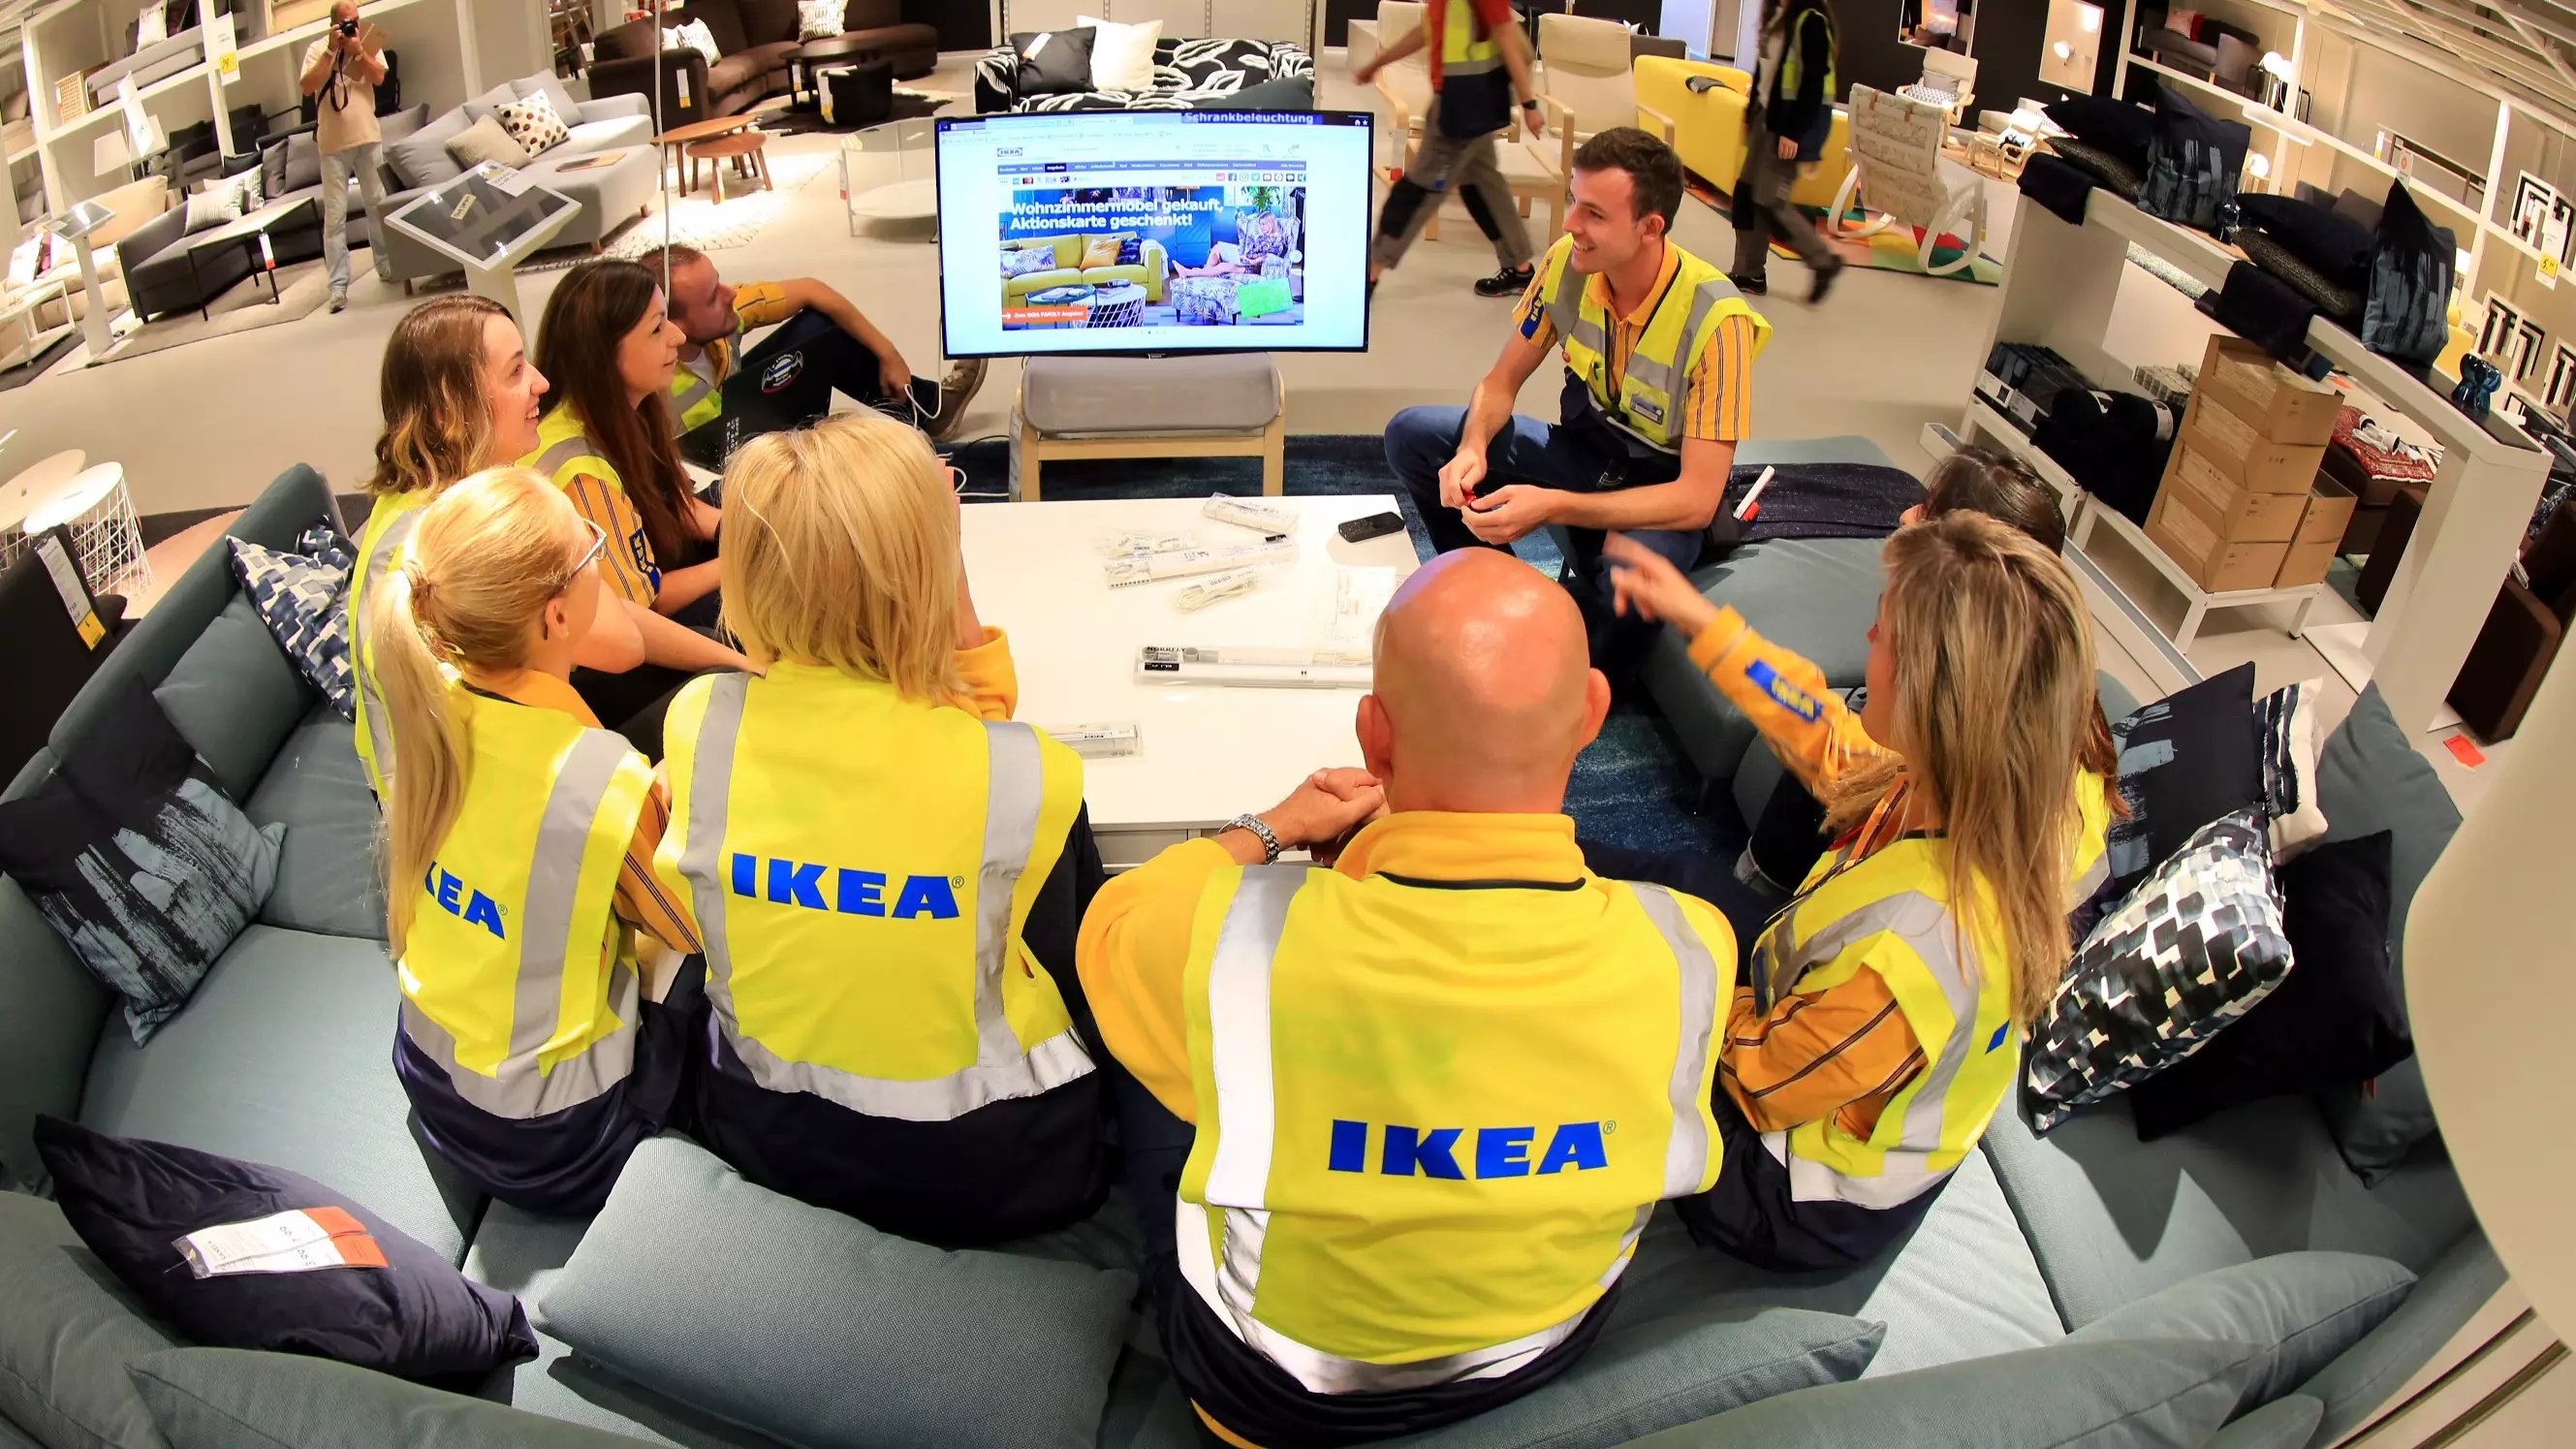 New Service From Ikea Is About To Change The Way We Build Flatpack Furniture